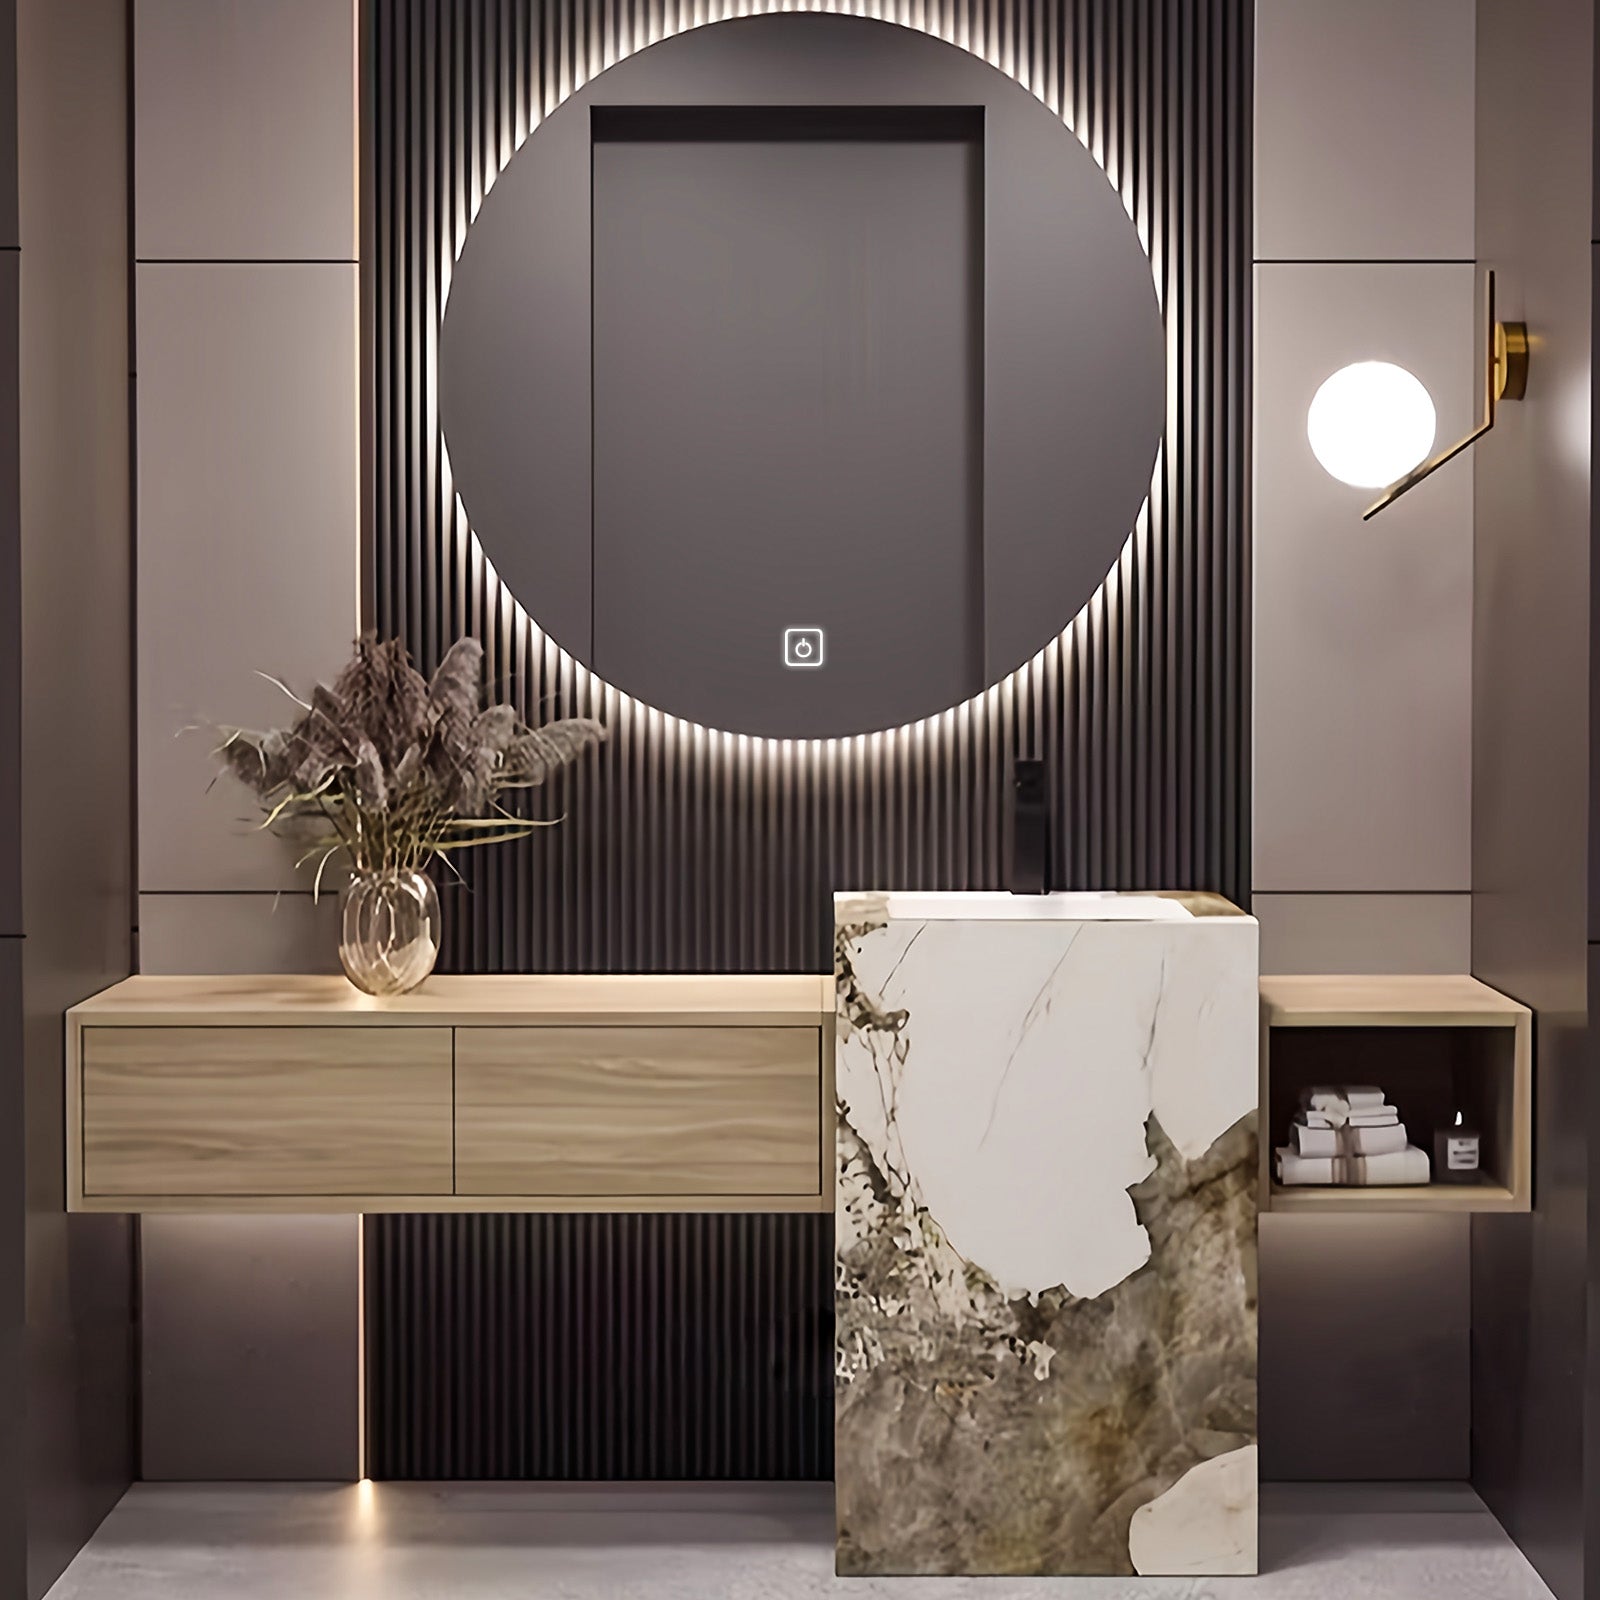 52"- 72" Round Mirror With LED Lighting And Natural Wood Color Single Basin And Sink